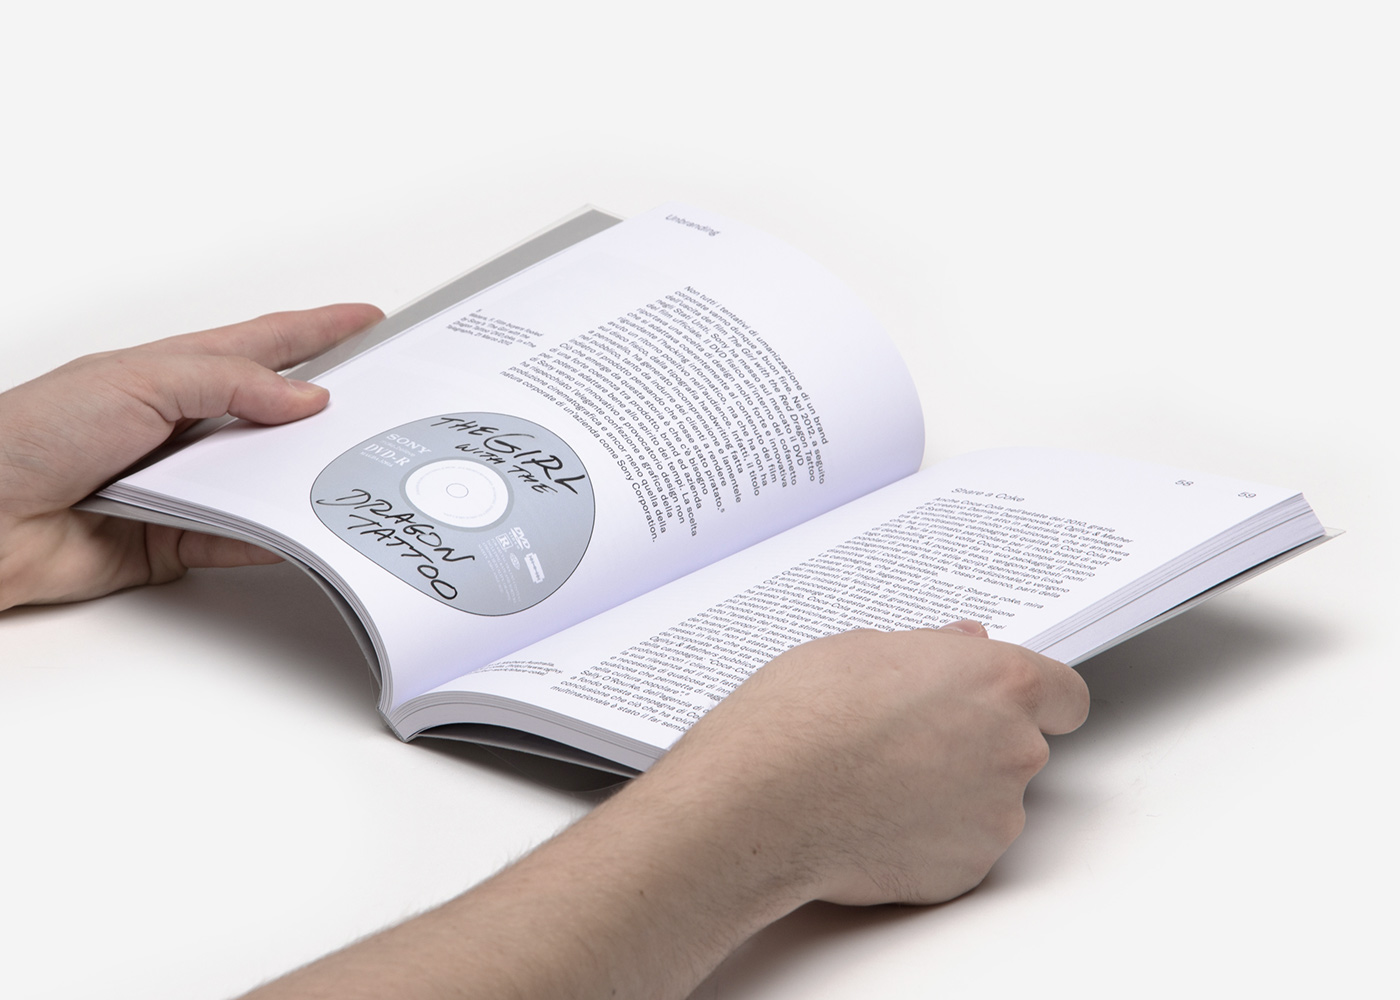 brand book logo unbranding graphic thesis normcore swiss typography   transparent